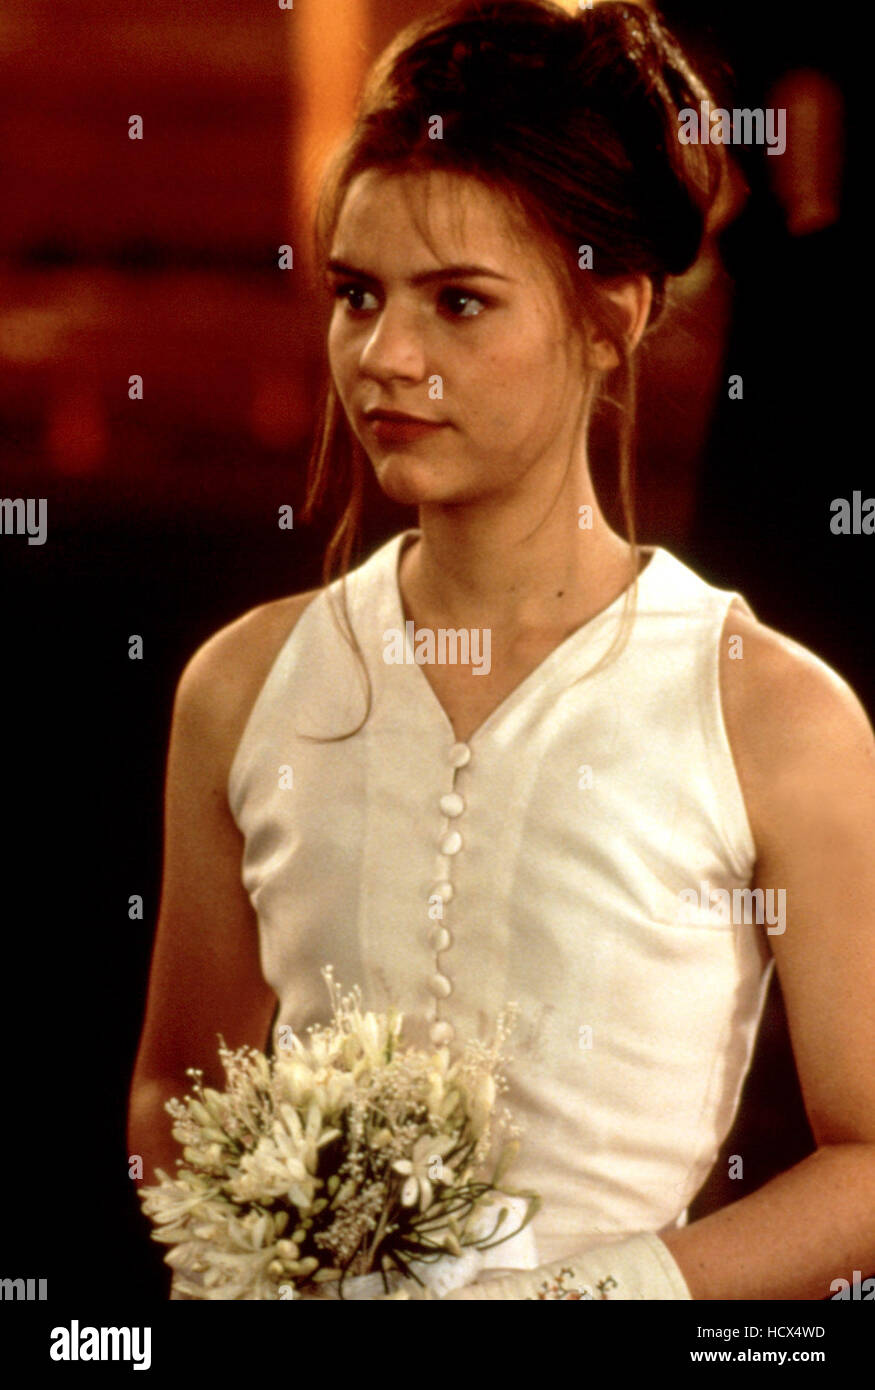 ROMEO AND JULIET, Claire Danes, 1996, flowers Stock Photo